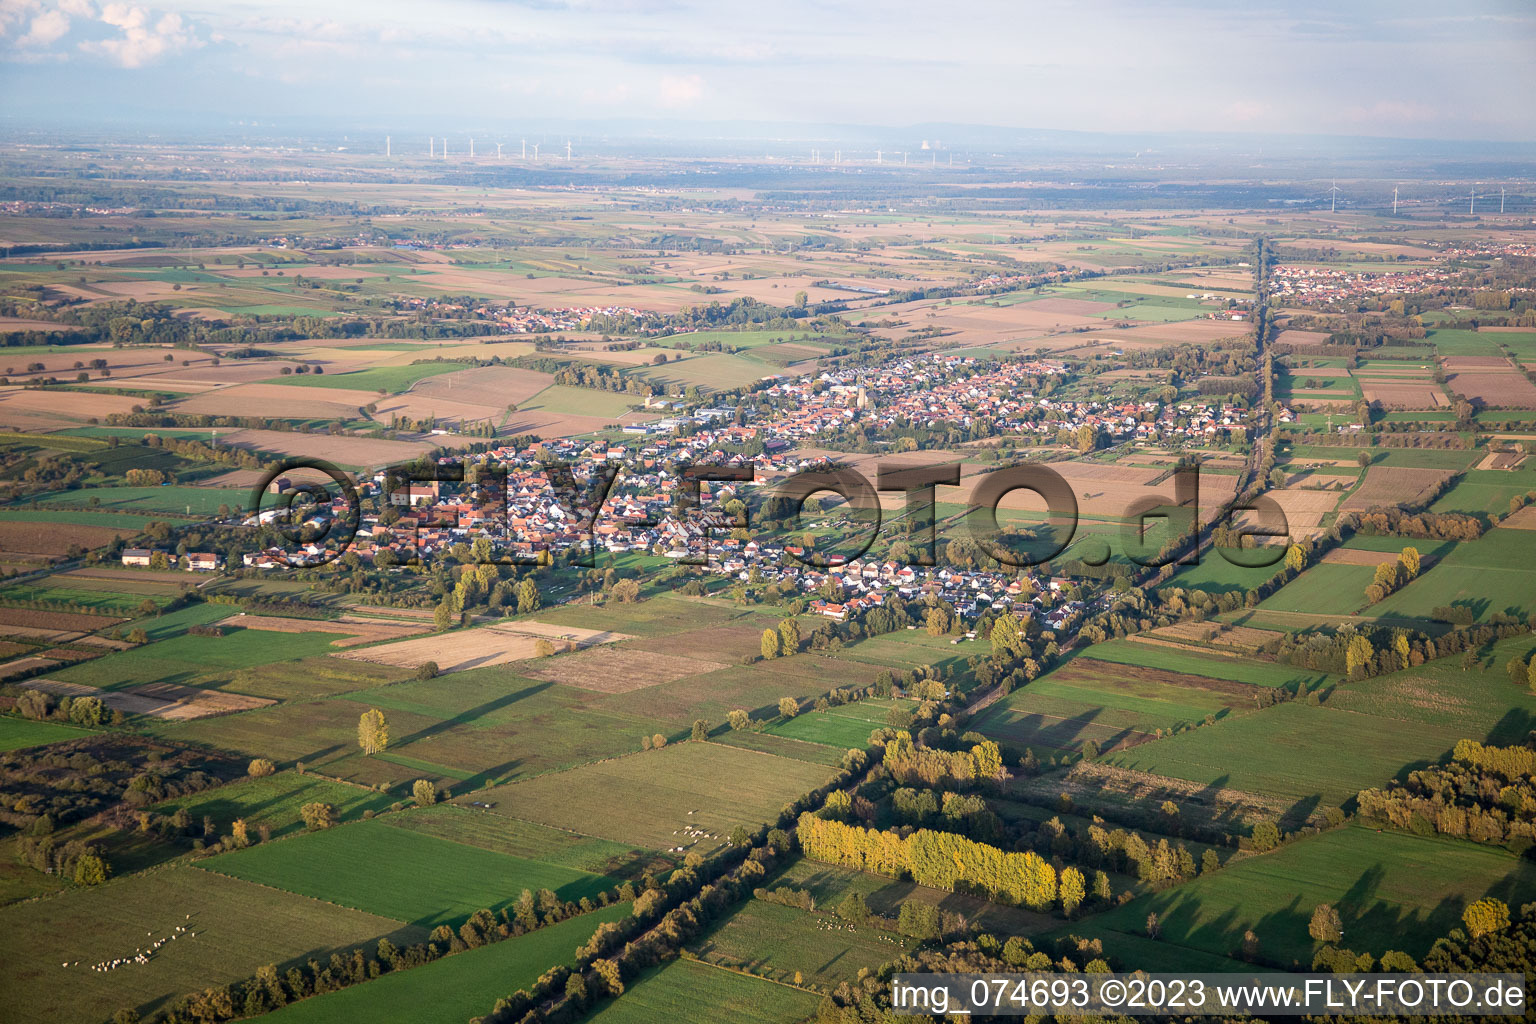 Kapsweyer in the state Rhineland-Palatinate, Germany from above